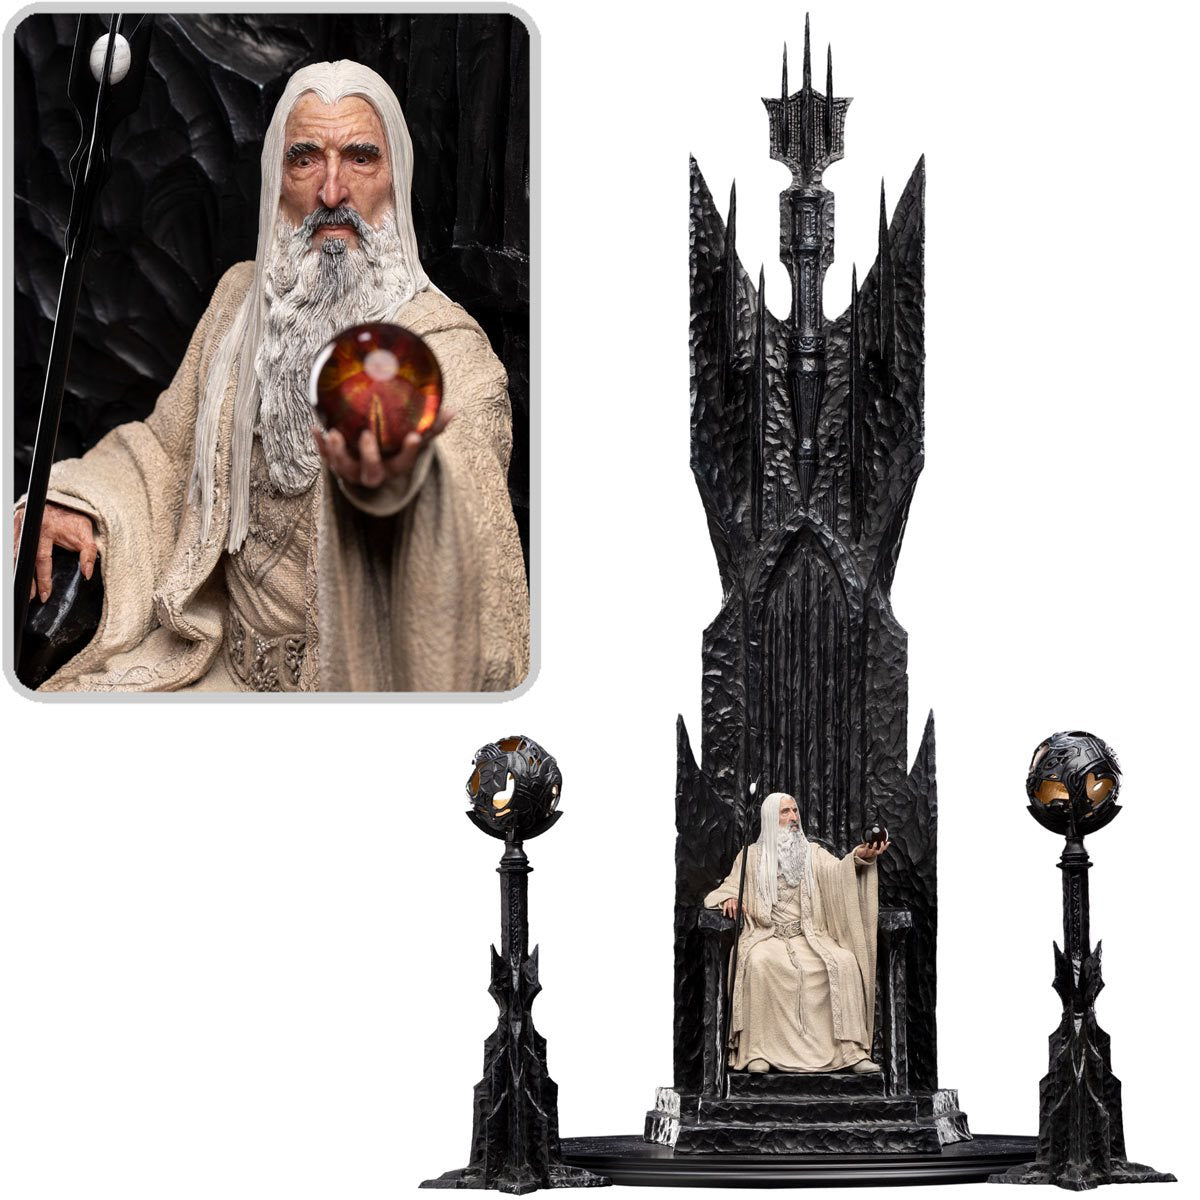 Lord of The Rings: How Old Is Saruman?